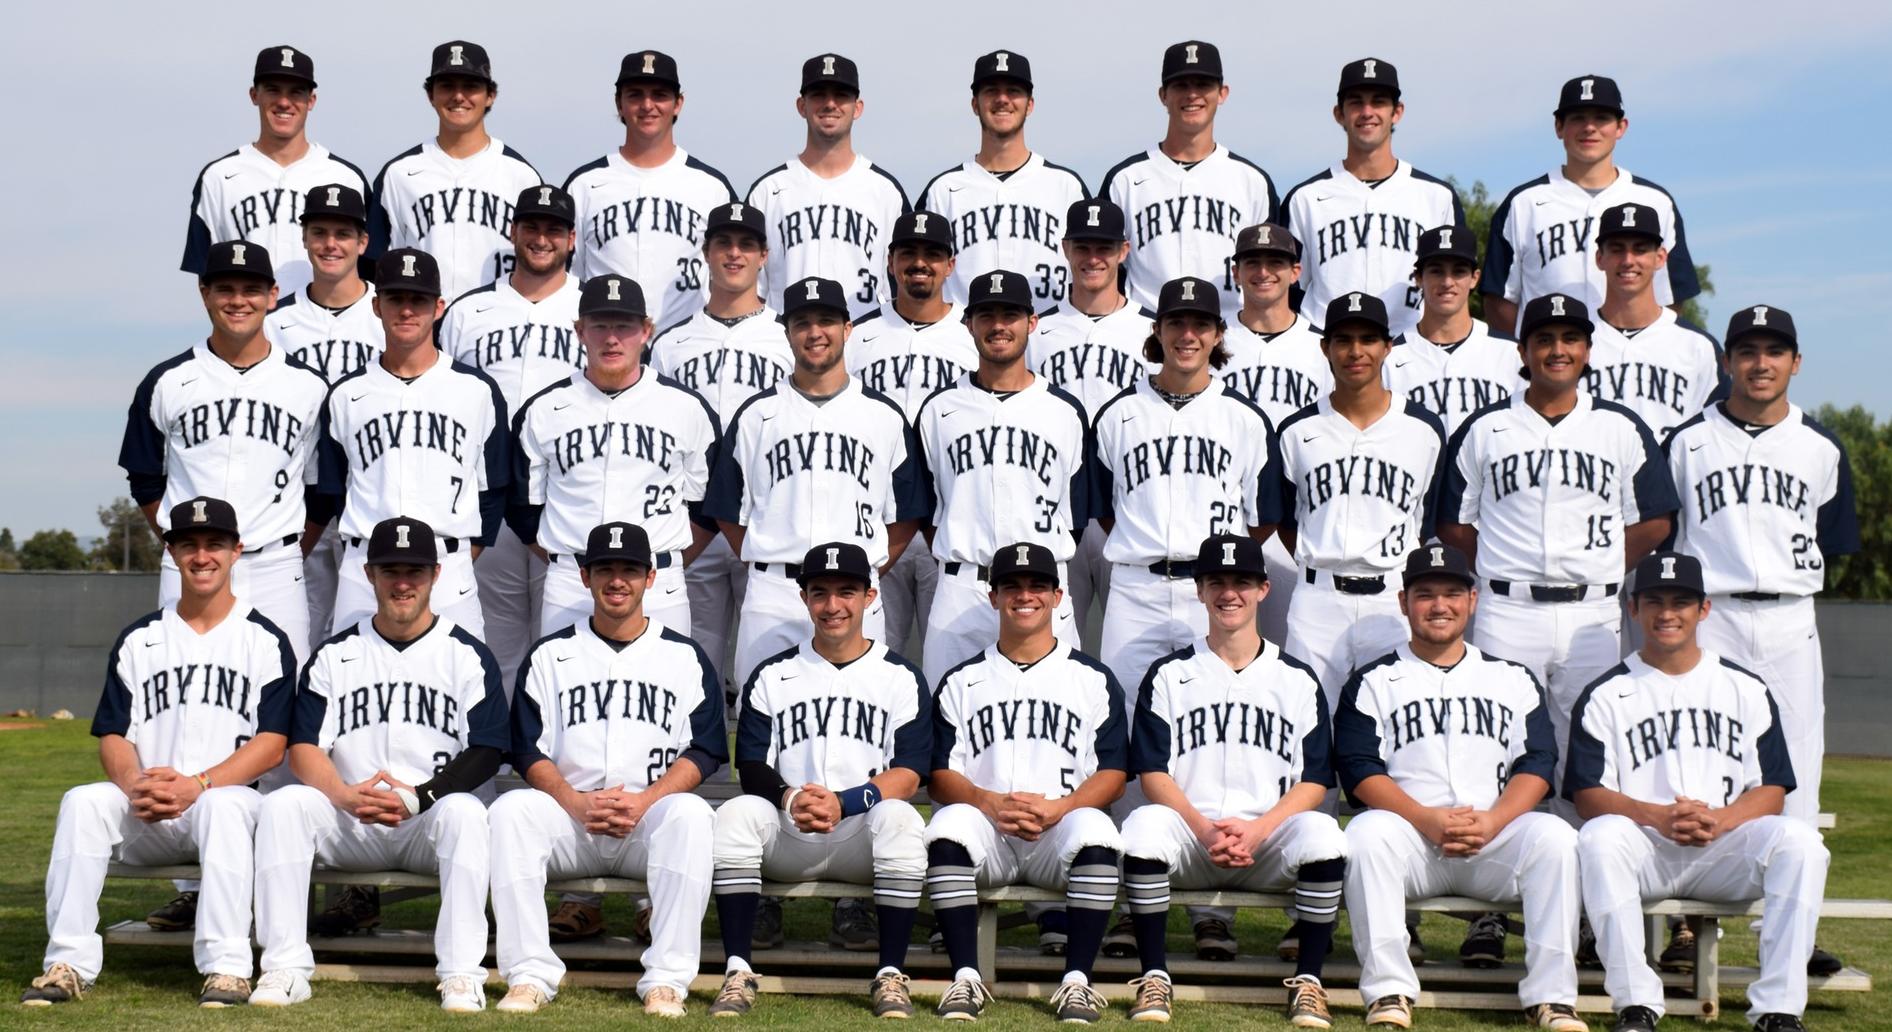 Baseball team makes the playoffs, faces Chaffey on Tuesday